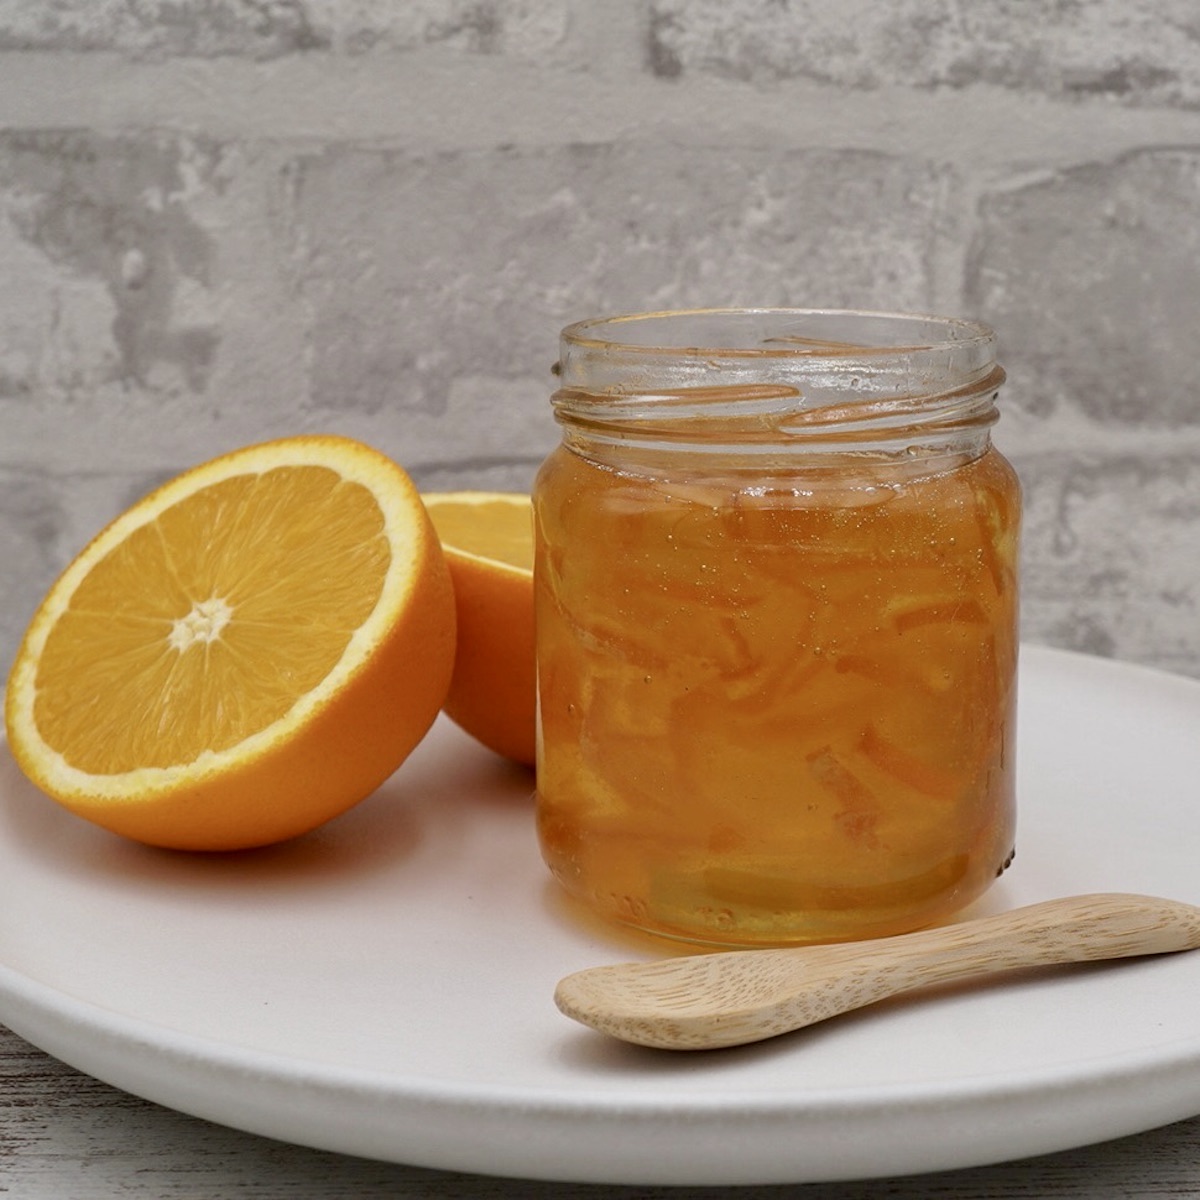 An open jar of Seville orange marmalade on a plate next to a spoon and an orange cut in half.